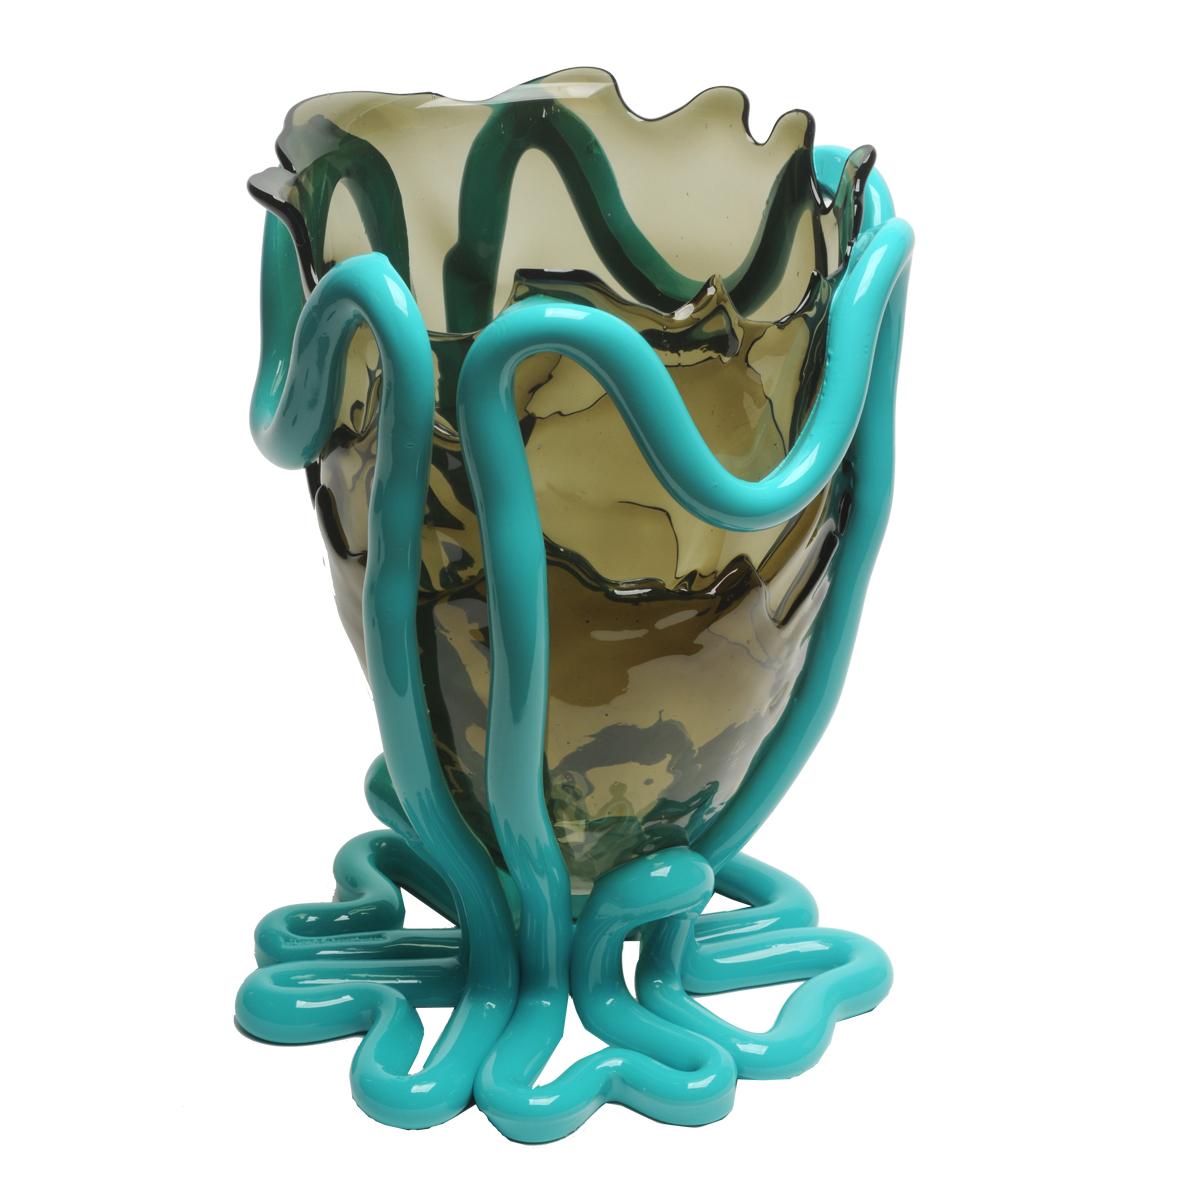 Italian Contemporary Gaetano Pesce Indian Summer XL Vase Soft Resin Grey Turquoise For Sale